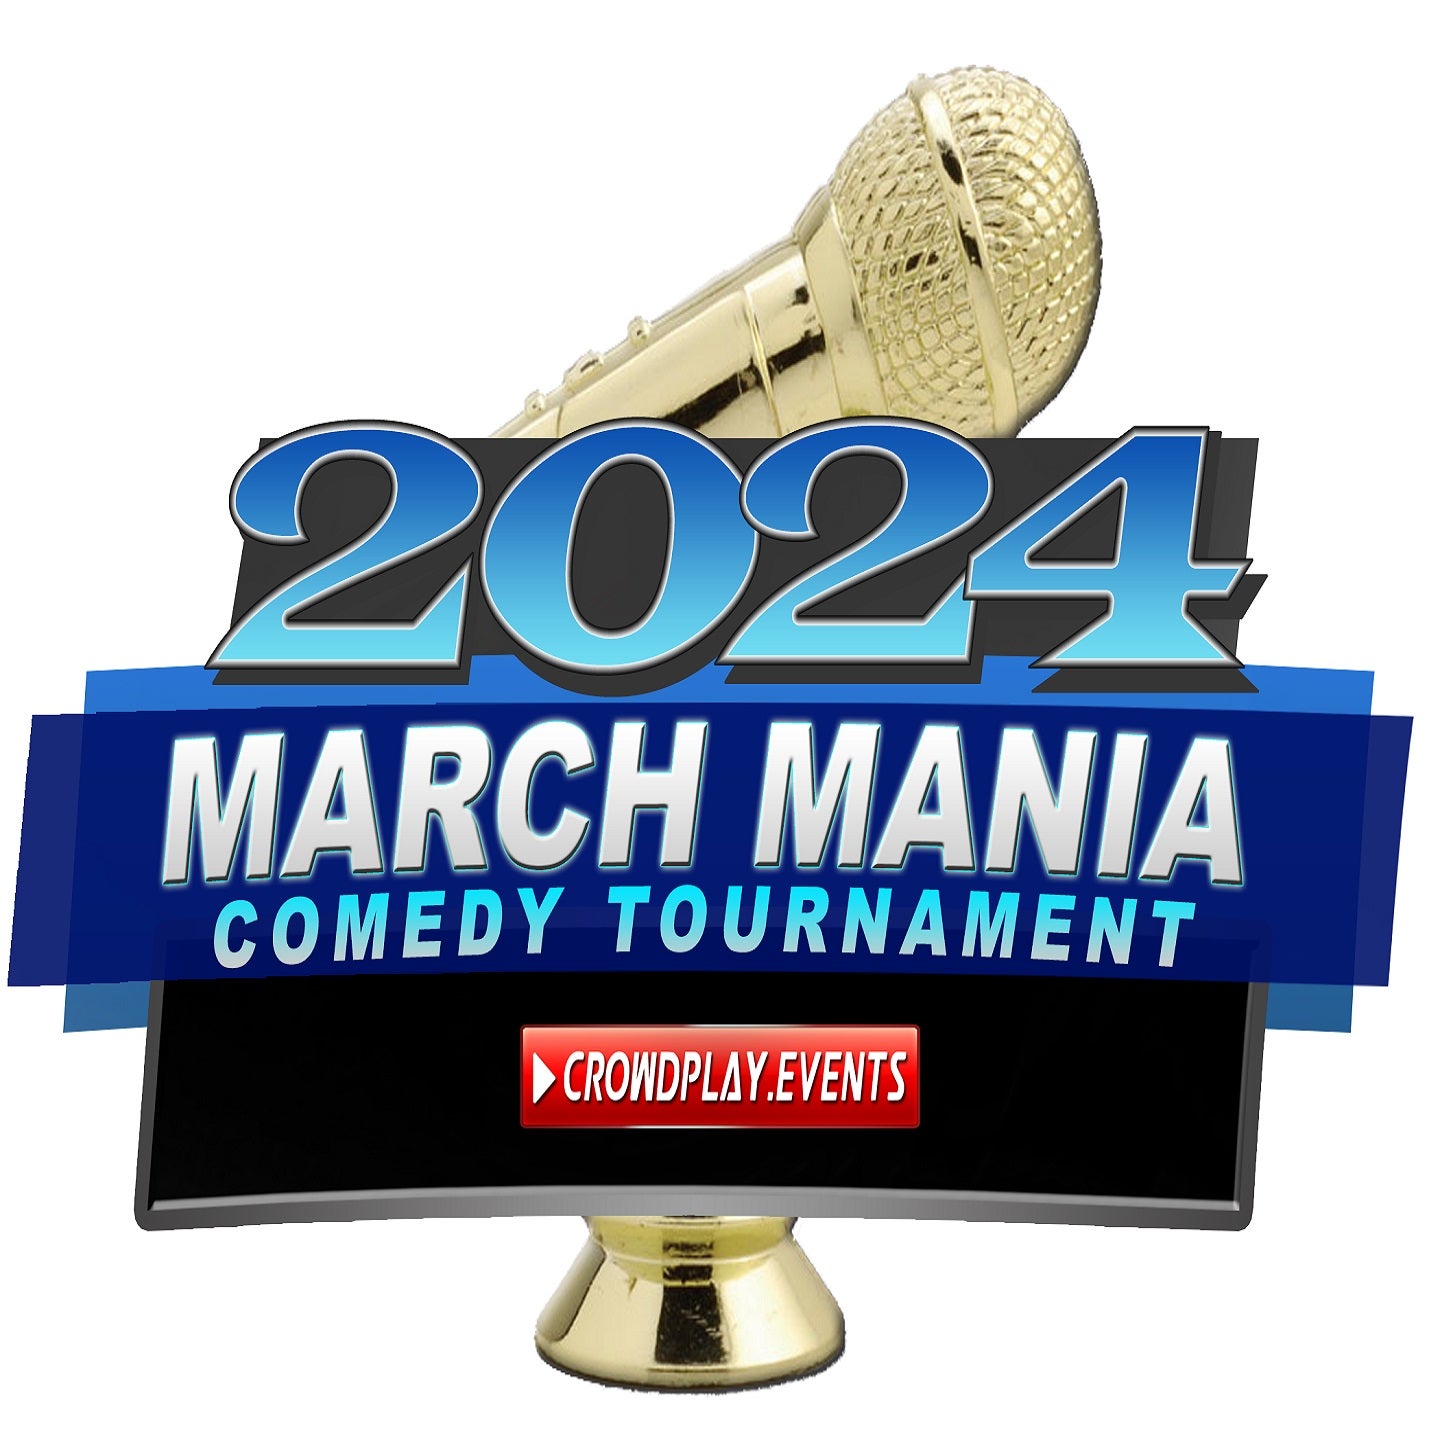 2024 March Mania Comedy Tournament Blumenthal Arts